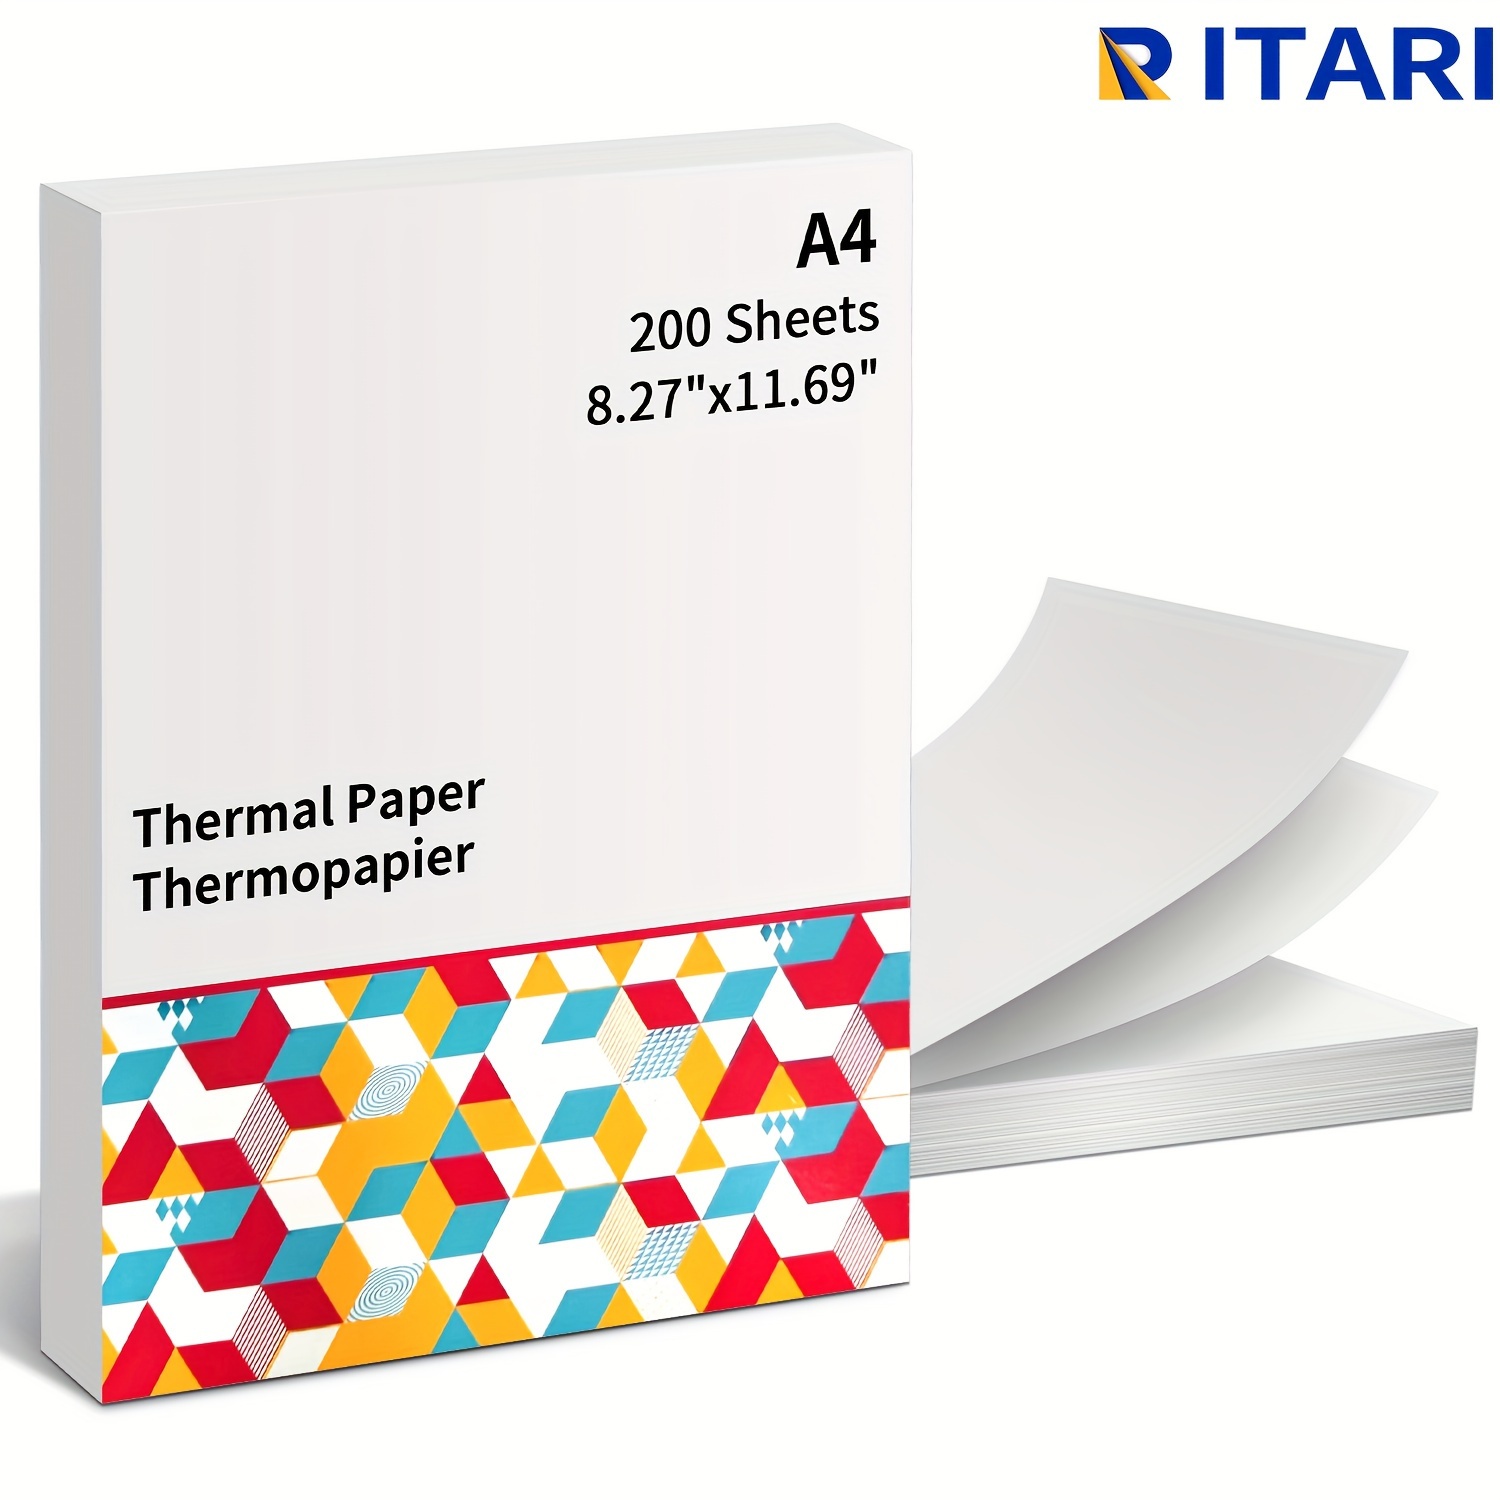 

200 Sheets A4 Thermal Paper For M08f-a4 Portable Printer, Multipurpose Thermal Paper For Picture, Homework, Contract, 8.27"x11.6"size